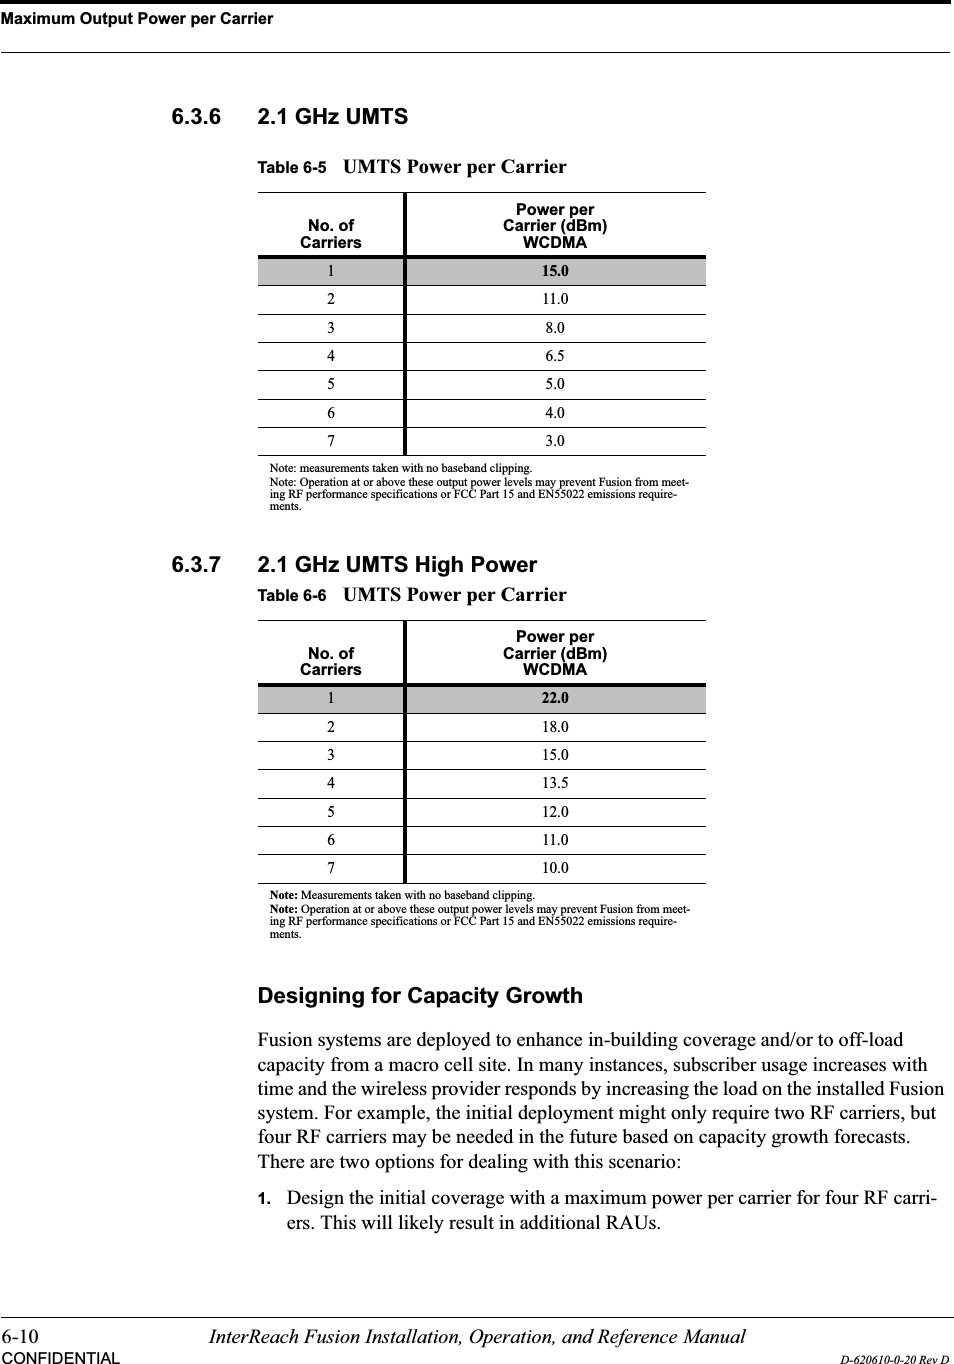 Maximum Output Power per Carrier6-10 InterReach Fusion Installation, Operation, and Reference ManualCONFIDENTIAL D-620610-0-20 Rev D6.3.6 2.1 GHz UMTS6.3.7 2.1 GHz UMTS High PowerDesigning for Capacity GrowthFusion systems are deployed to enhance in-building coverage and/or to off-load capacity from a macro cell site. In many instances, subscriber usage increases with time and the wireless provider responds by increasing the load on the installed Fusion system. For example, the initial deployment might only require two RF carriers, but four RF carriers may be needed in the future based on capacity growth forecasts.   There are two options for dealing with this scenario:1. Design the initial coverage with a maximum power per carrier for four RF carri-ers. This will likely result in additional RAUs.Table 6-5 UMTS Power per CarrierNo. ofCarriersPower per Carrier (dBm)WCDMA115.0211.038.046.555.064.073.0Note: measurements taken with no baseband clipping.Note: Operation at or above these output power levels may prevent Fusion from meet-ing RF performance specifications or FCC Part 15 and EN55022 emissions require-ments. Table 6-6 UMTS Power per CarrierNo. ofCarriersPower per Carrier (dBm)WCDMA122.02 18.03 15.04 13.55 12.0611.07 10.0Note: Measurements taken with no baseband clipping.Note: Operation at or above these output power levels may prevent Fusion from meet-ing RF performance specifications or FCC Part 15 and EN55022 emissions require-ments. 